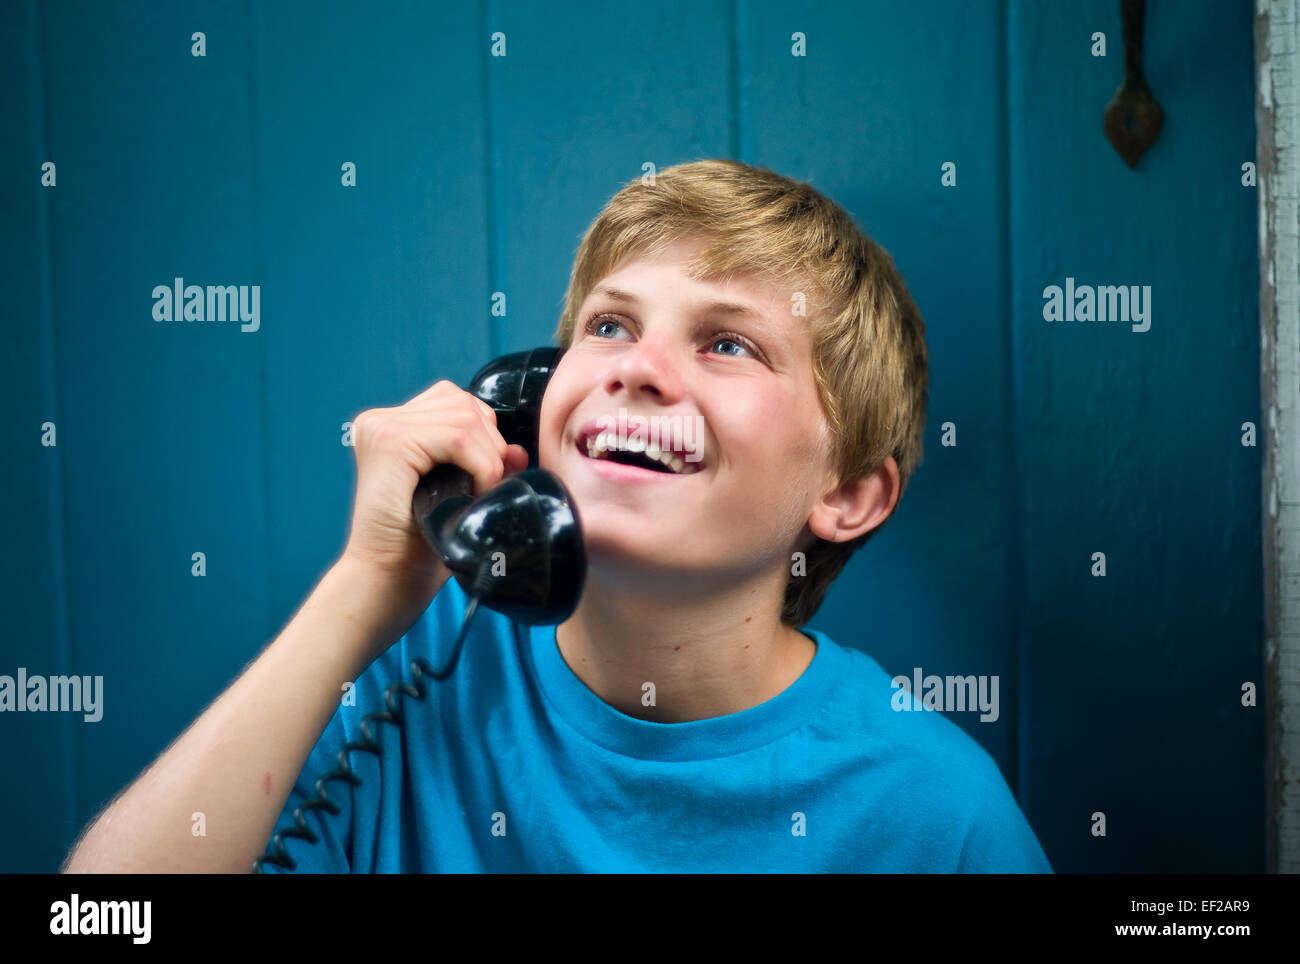 Child 10,11,12,13 laughing while talking on telephone, holding receiver Stock Photo